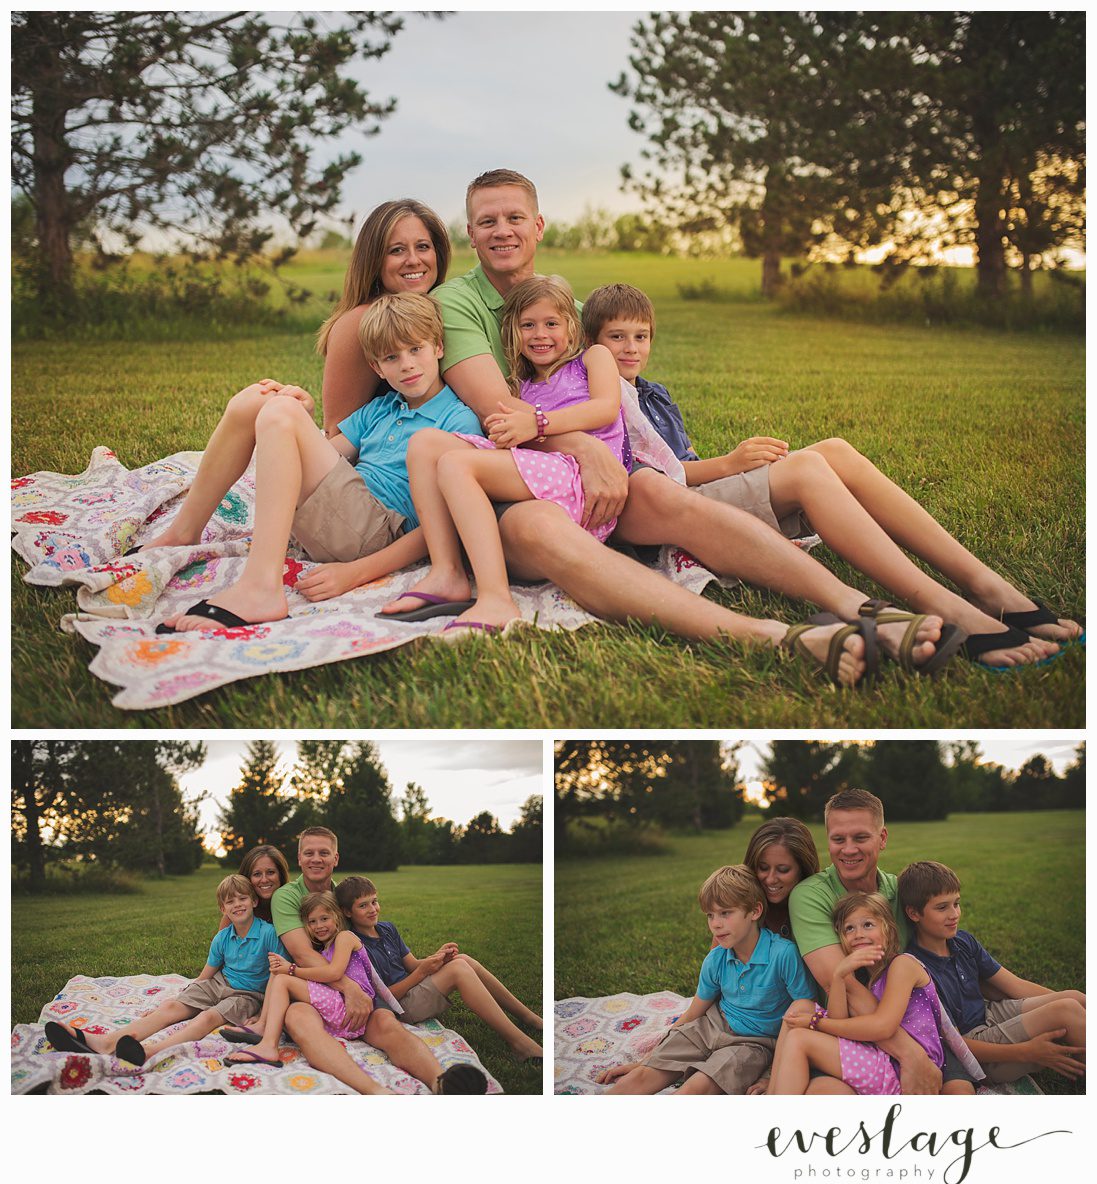 Join the Eveslage Photography Family!  Check out our info page to book your session.